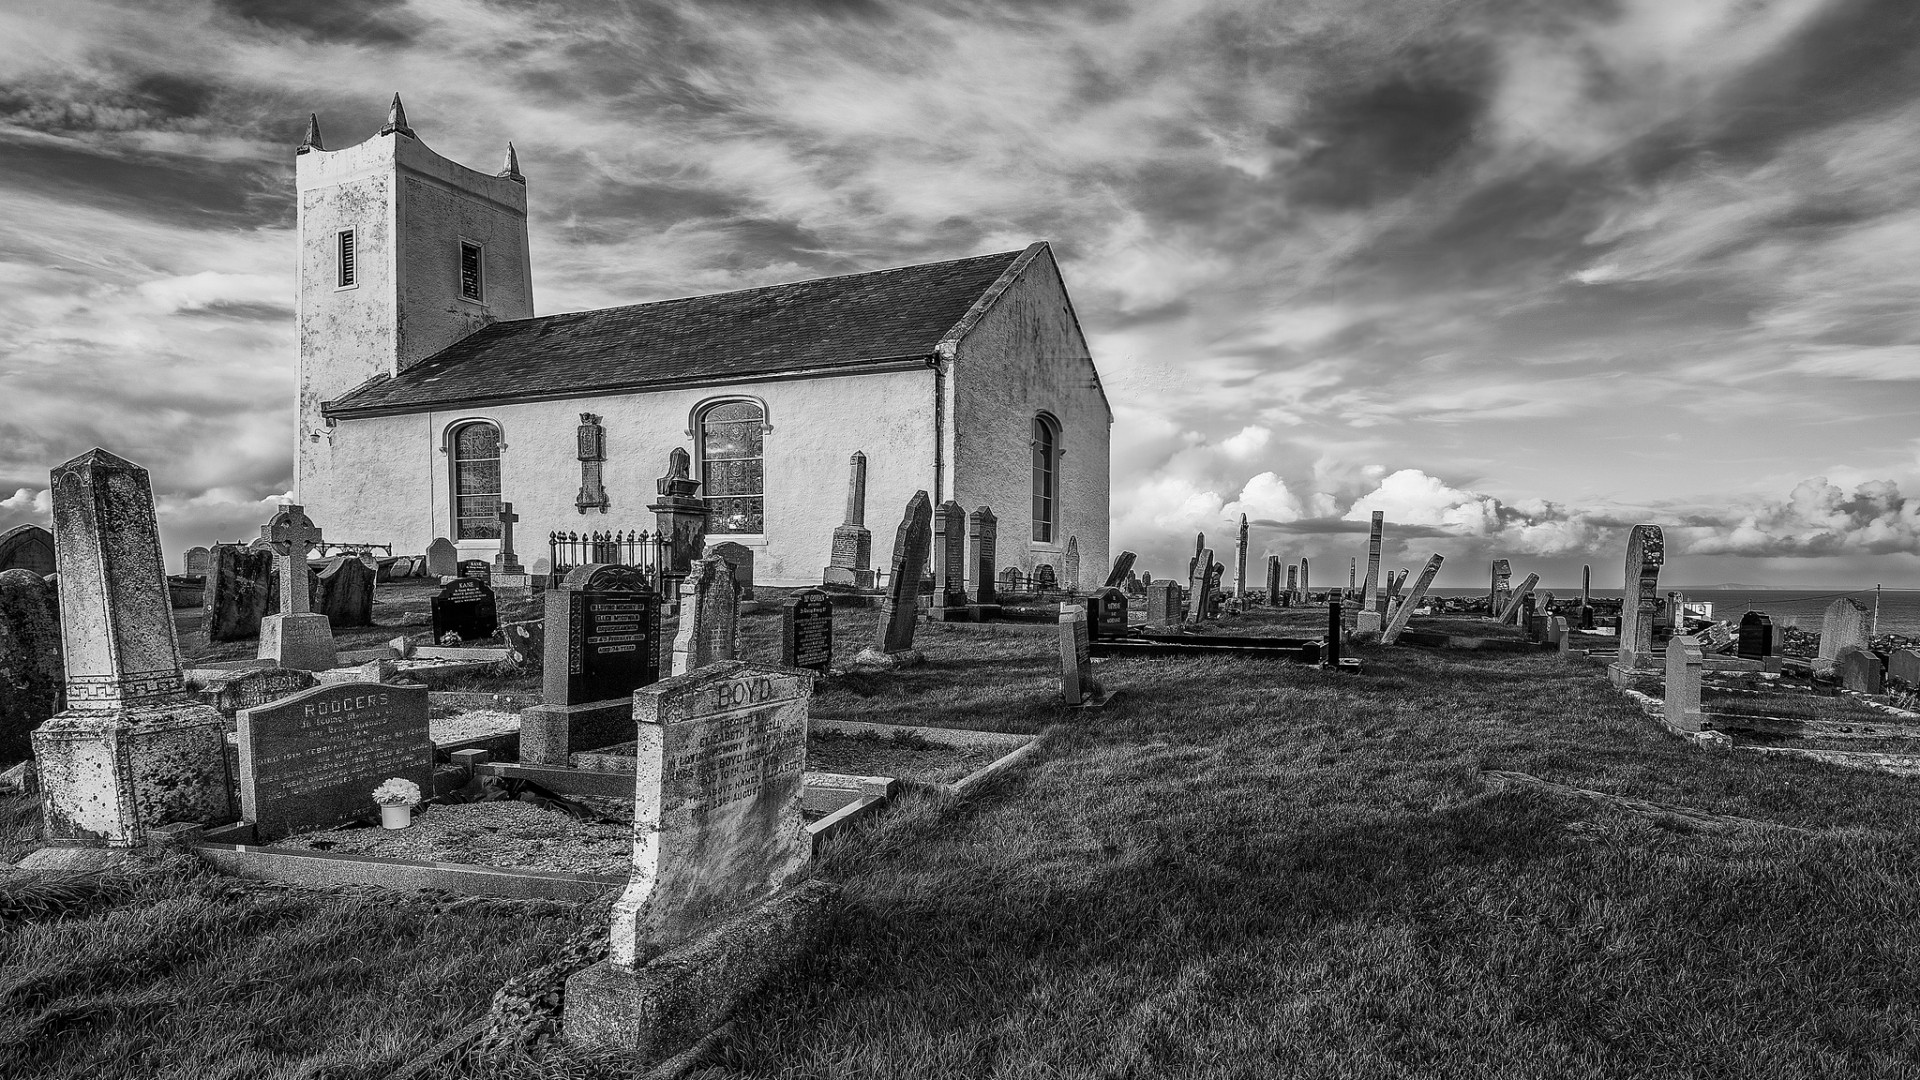 Architecture Monochrome Grass Clouds Church Cemetery Grave England UK Cross HDR Old 1920x1080